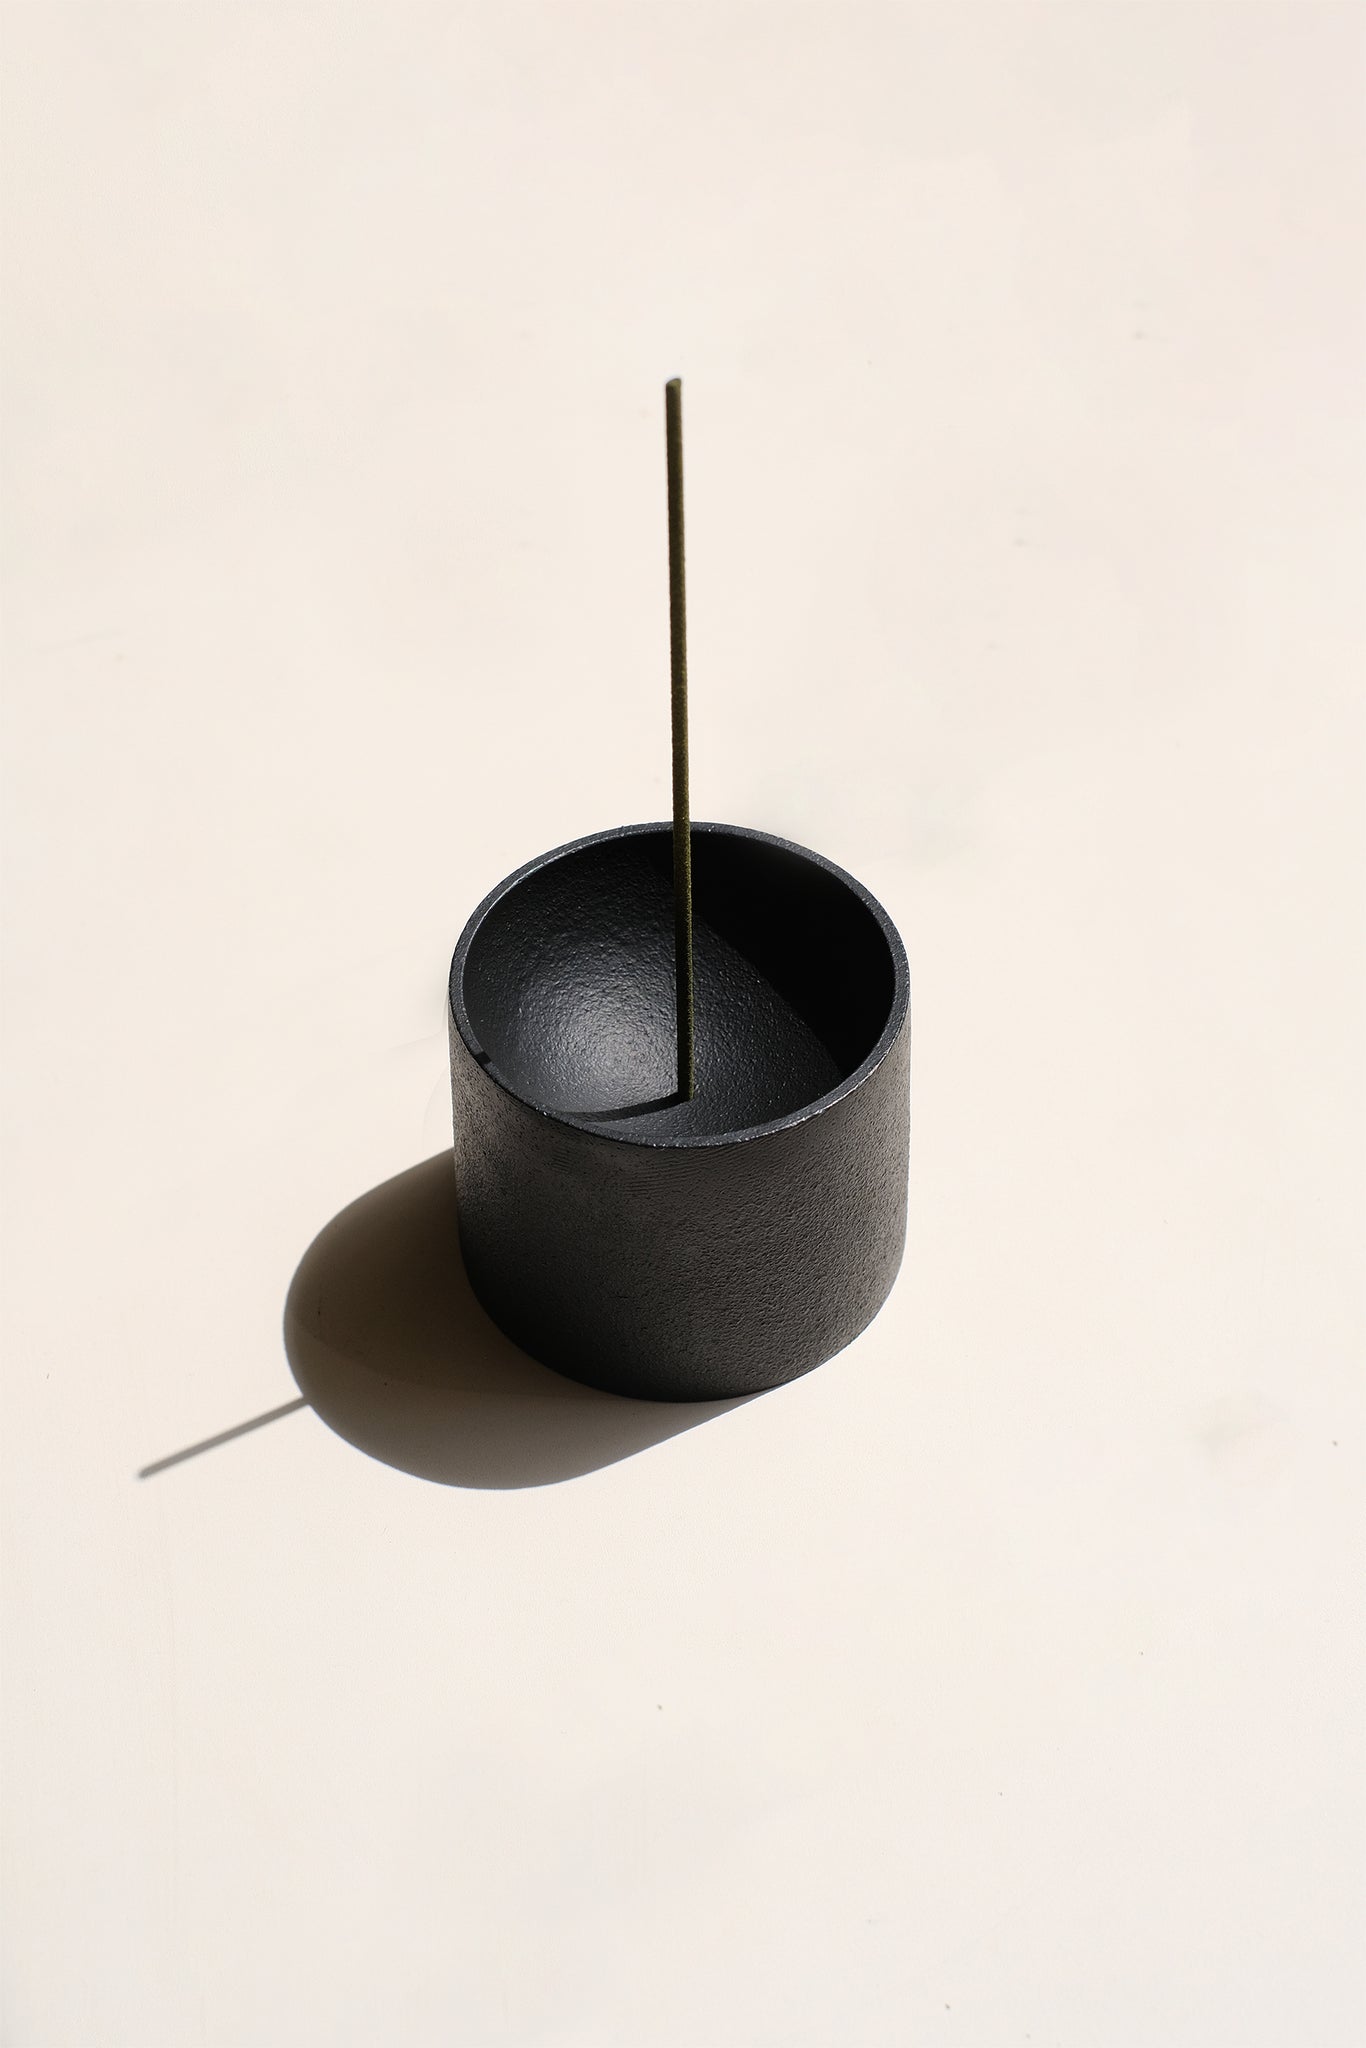 Quolo Sphere Incense Holder